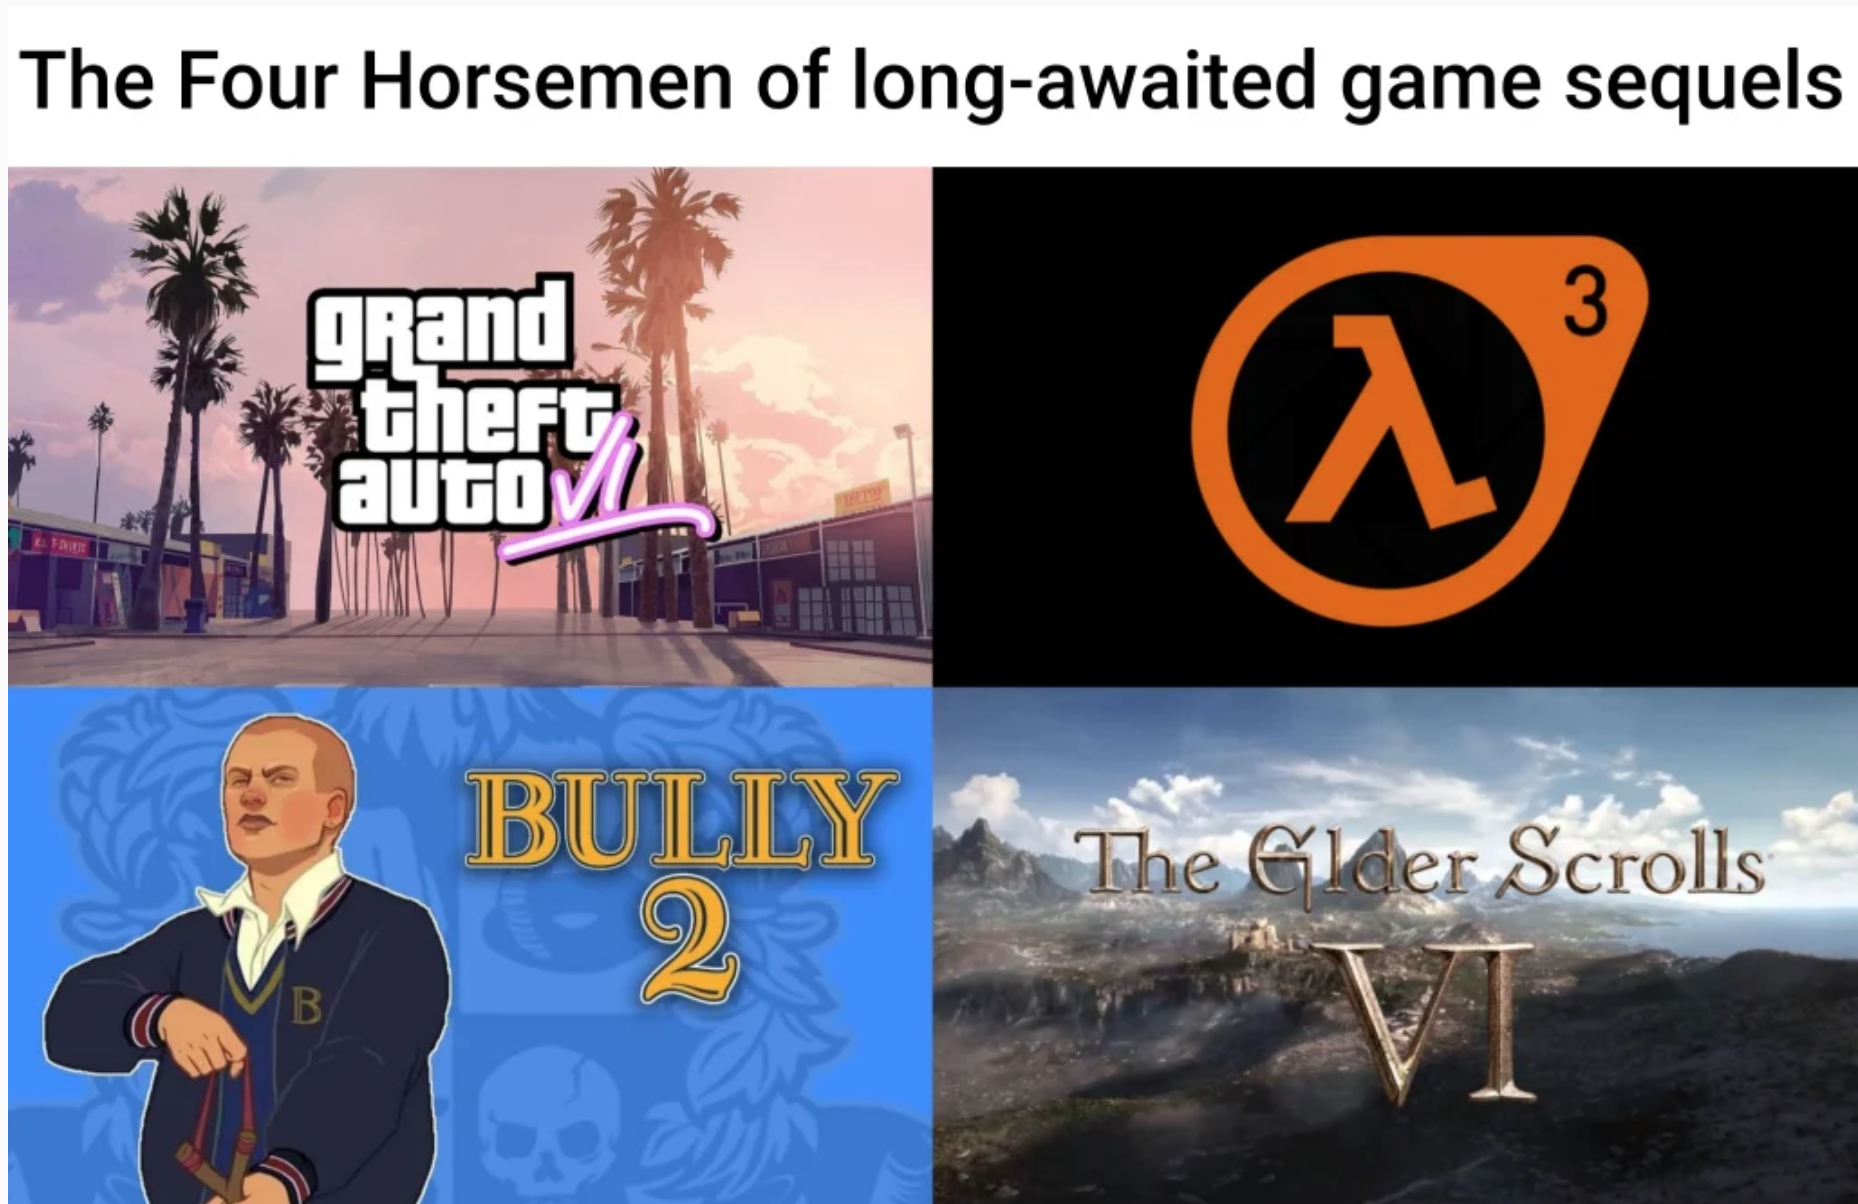 funny gaming memes - presentation - The Four Horsemen of longawaited game sequels grand theft auto Bully 2 The Elder Scrolls B